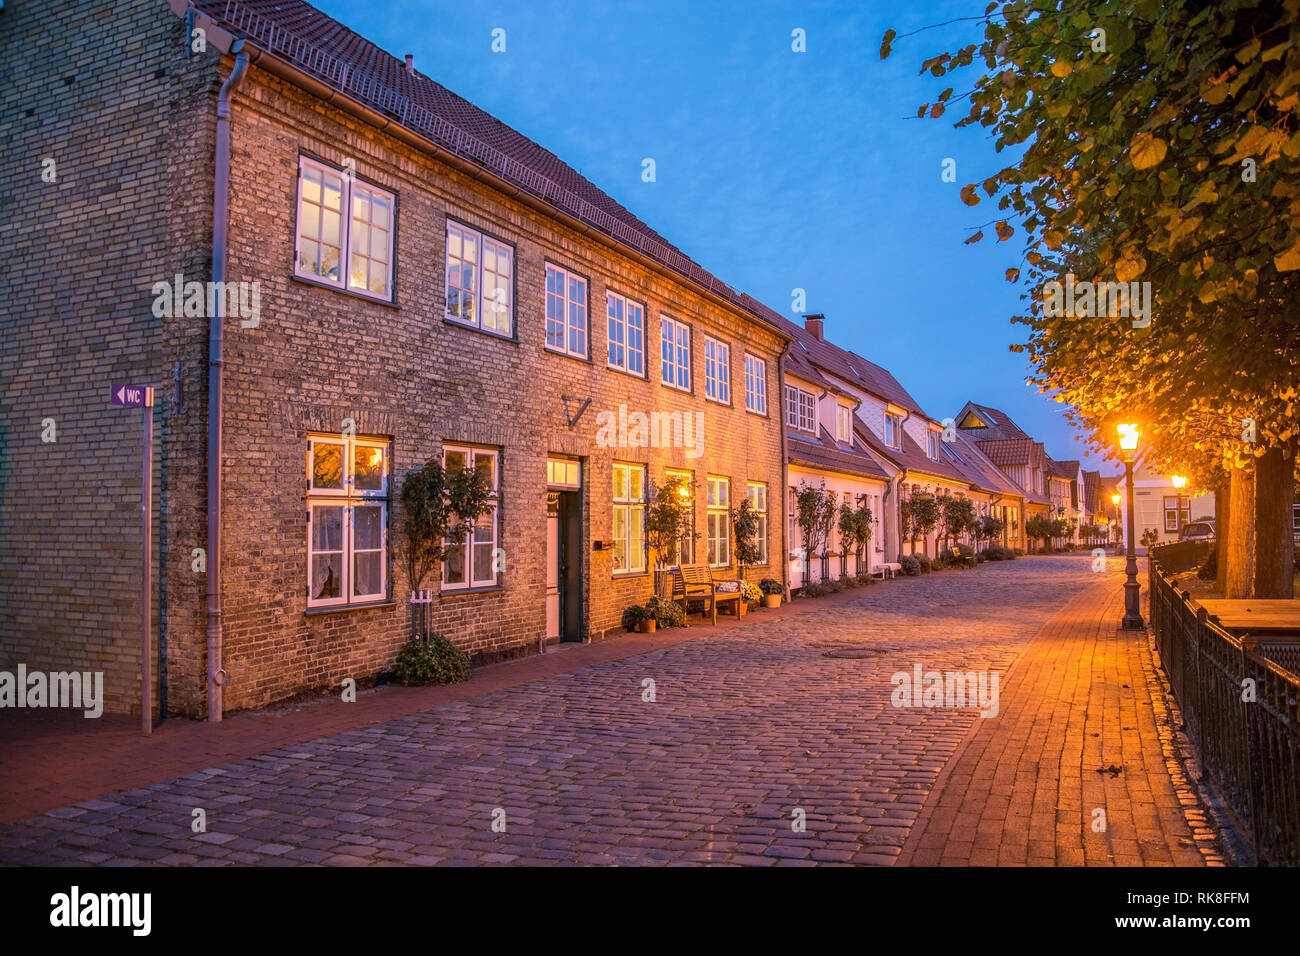 The Holm is a fishermans quarter in Sleswick, Schleswig-Holstein, Germany. Stock Photo